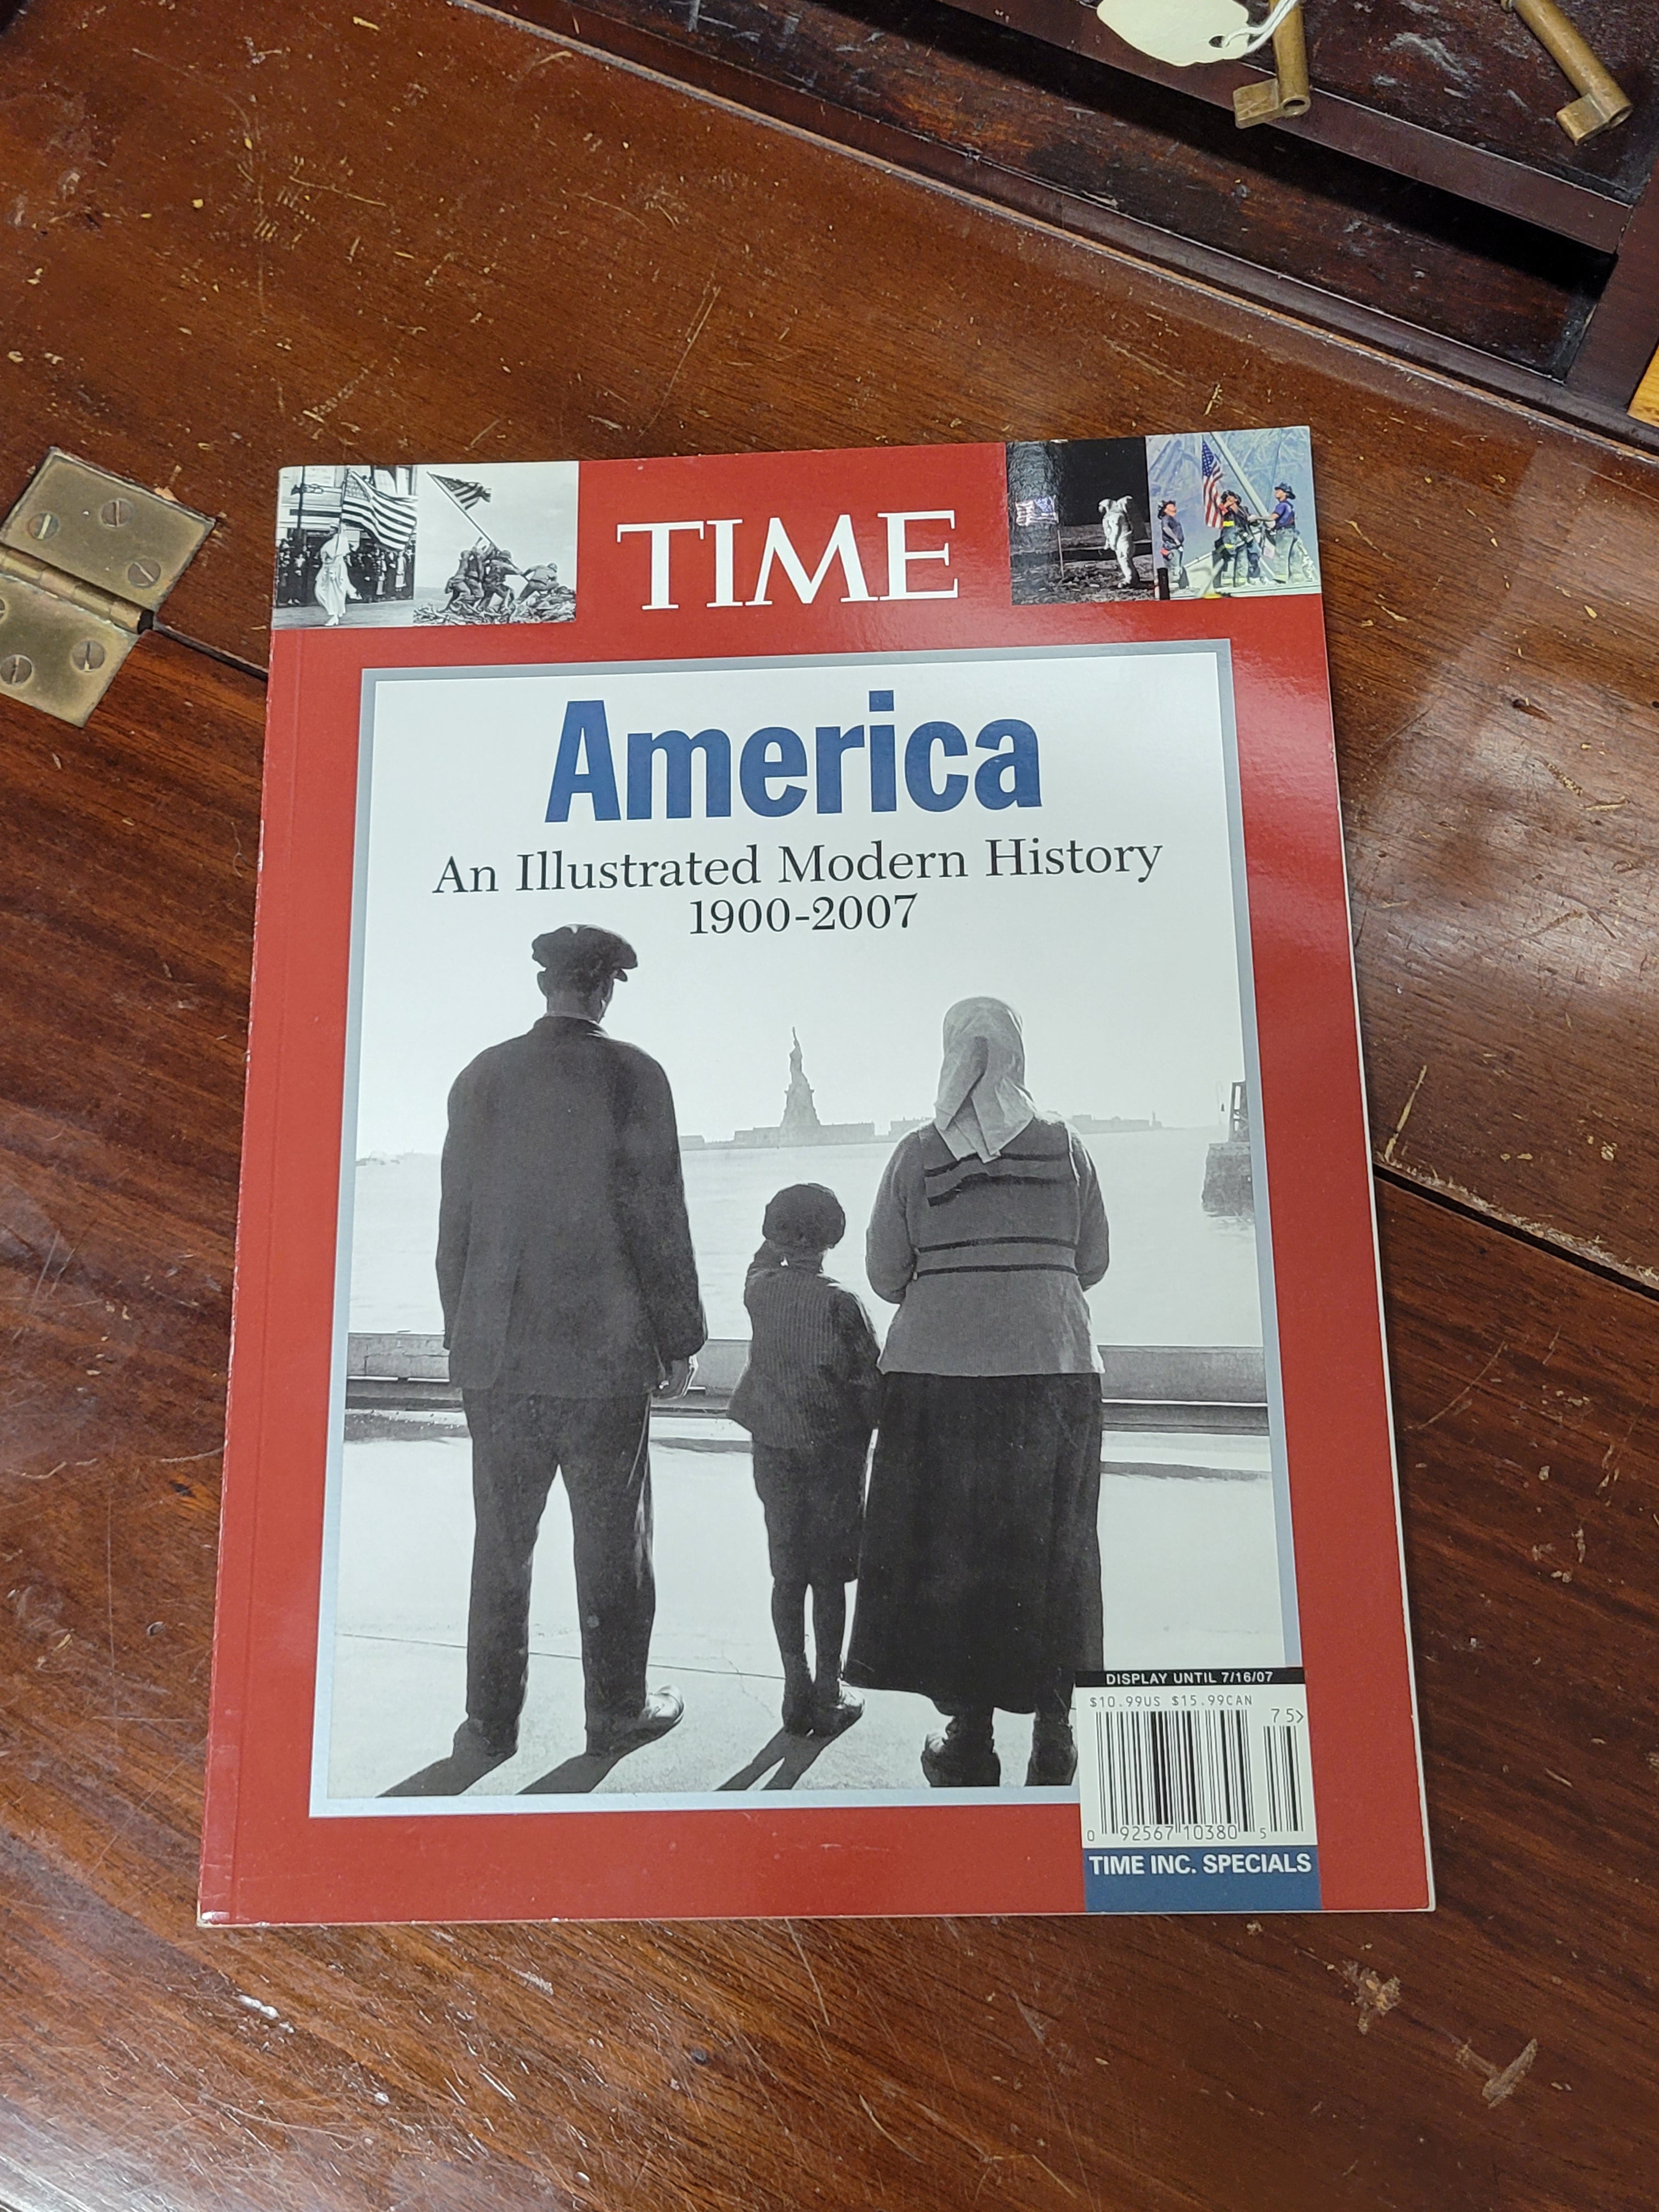 Time America: An Illustrated Modern History 1900-2007